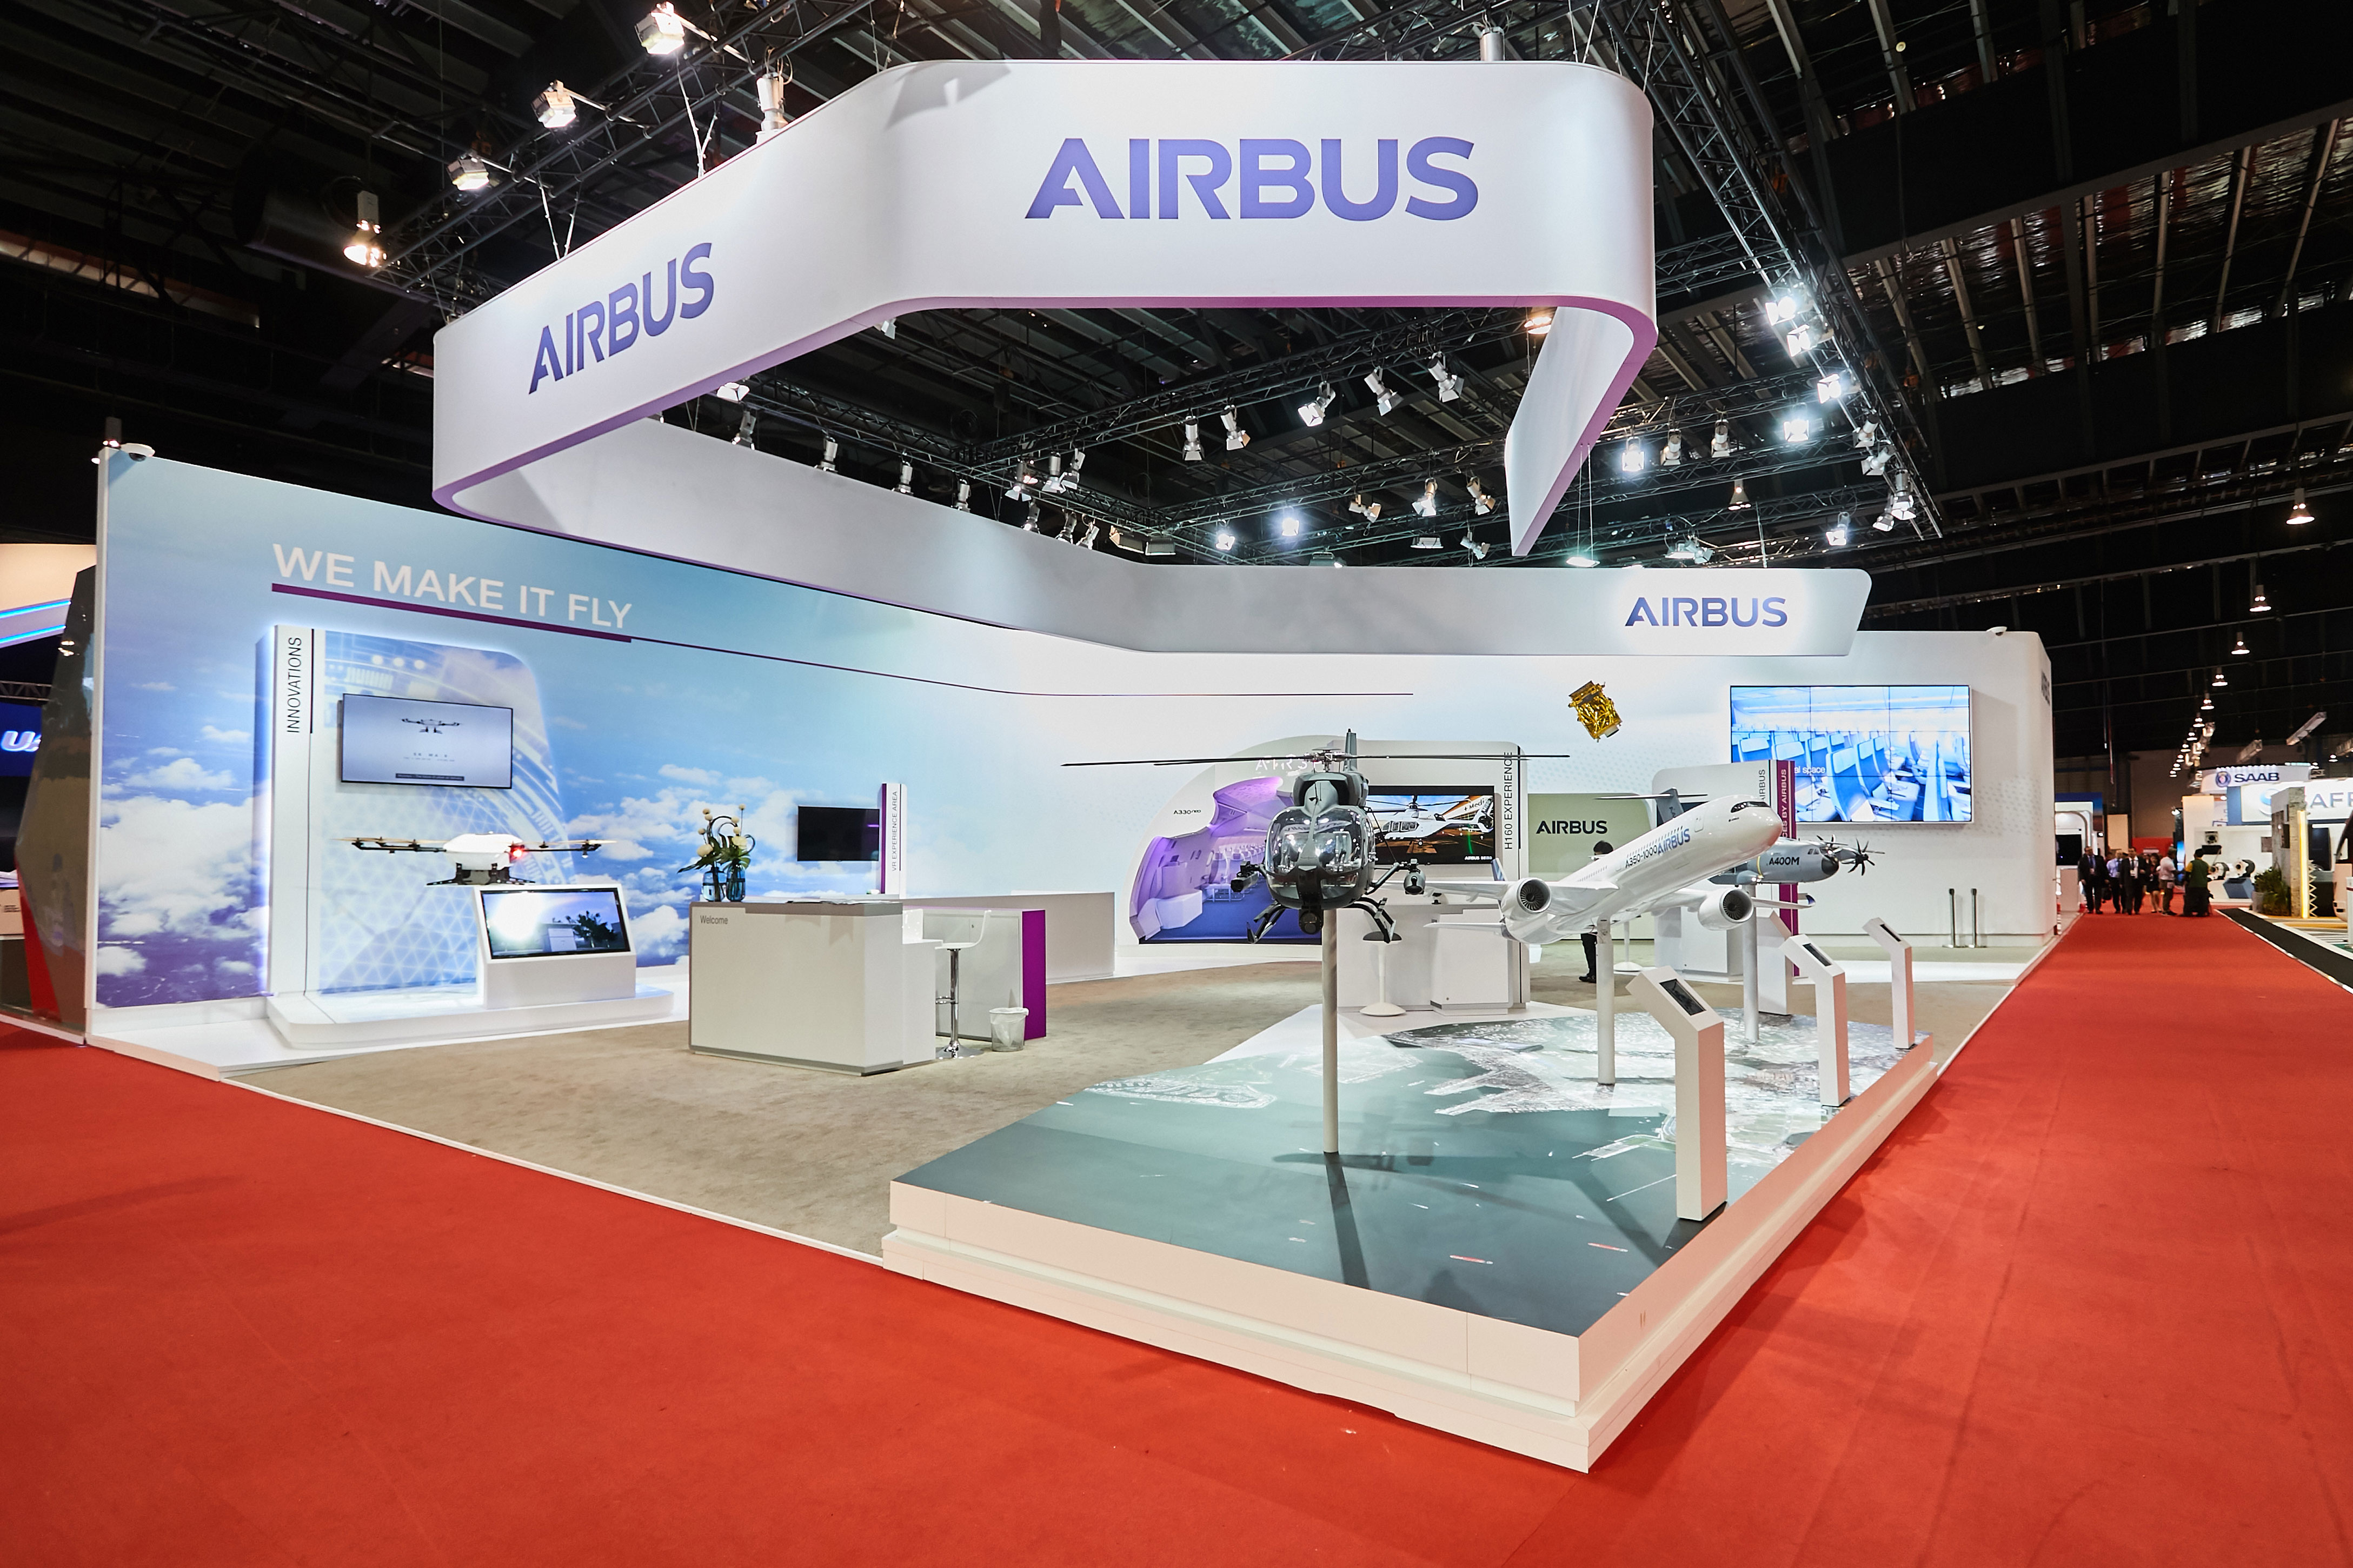 http://www.nestsolutionsgroup.com/wp-content/uploads/2019/02/AIRBUS_001.jpg